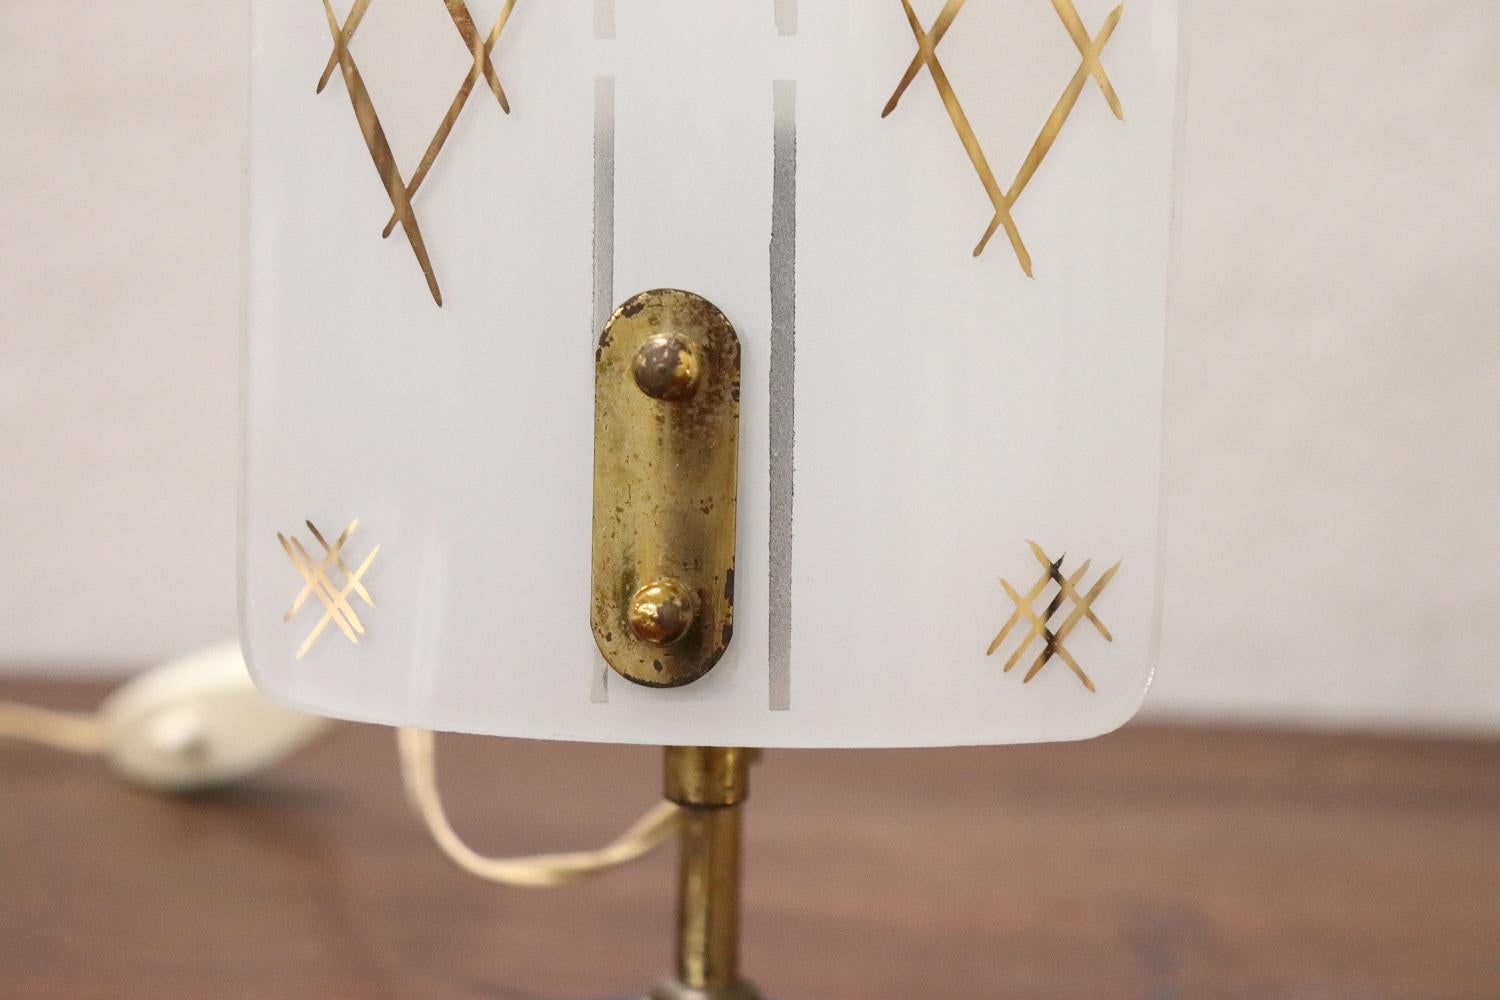 Metal Italian Design Small Table Lamp, 1950s For Sale